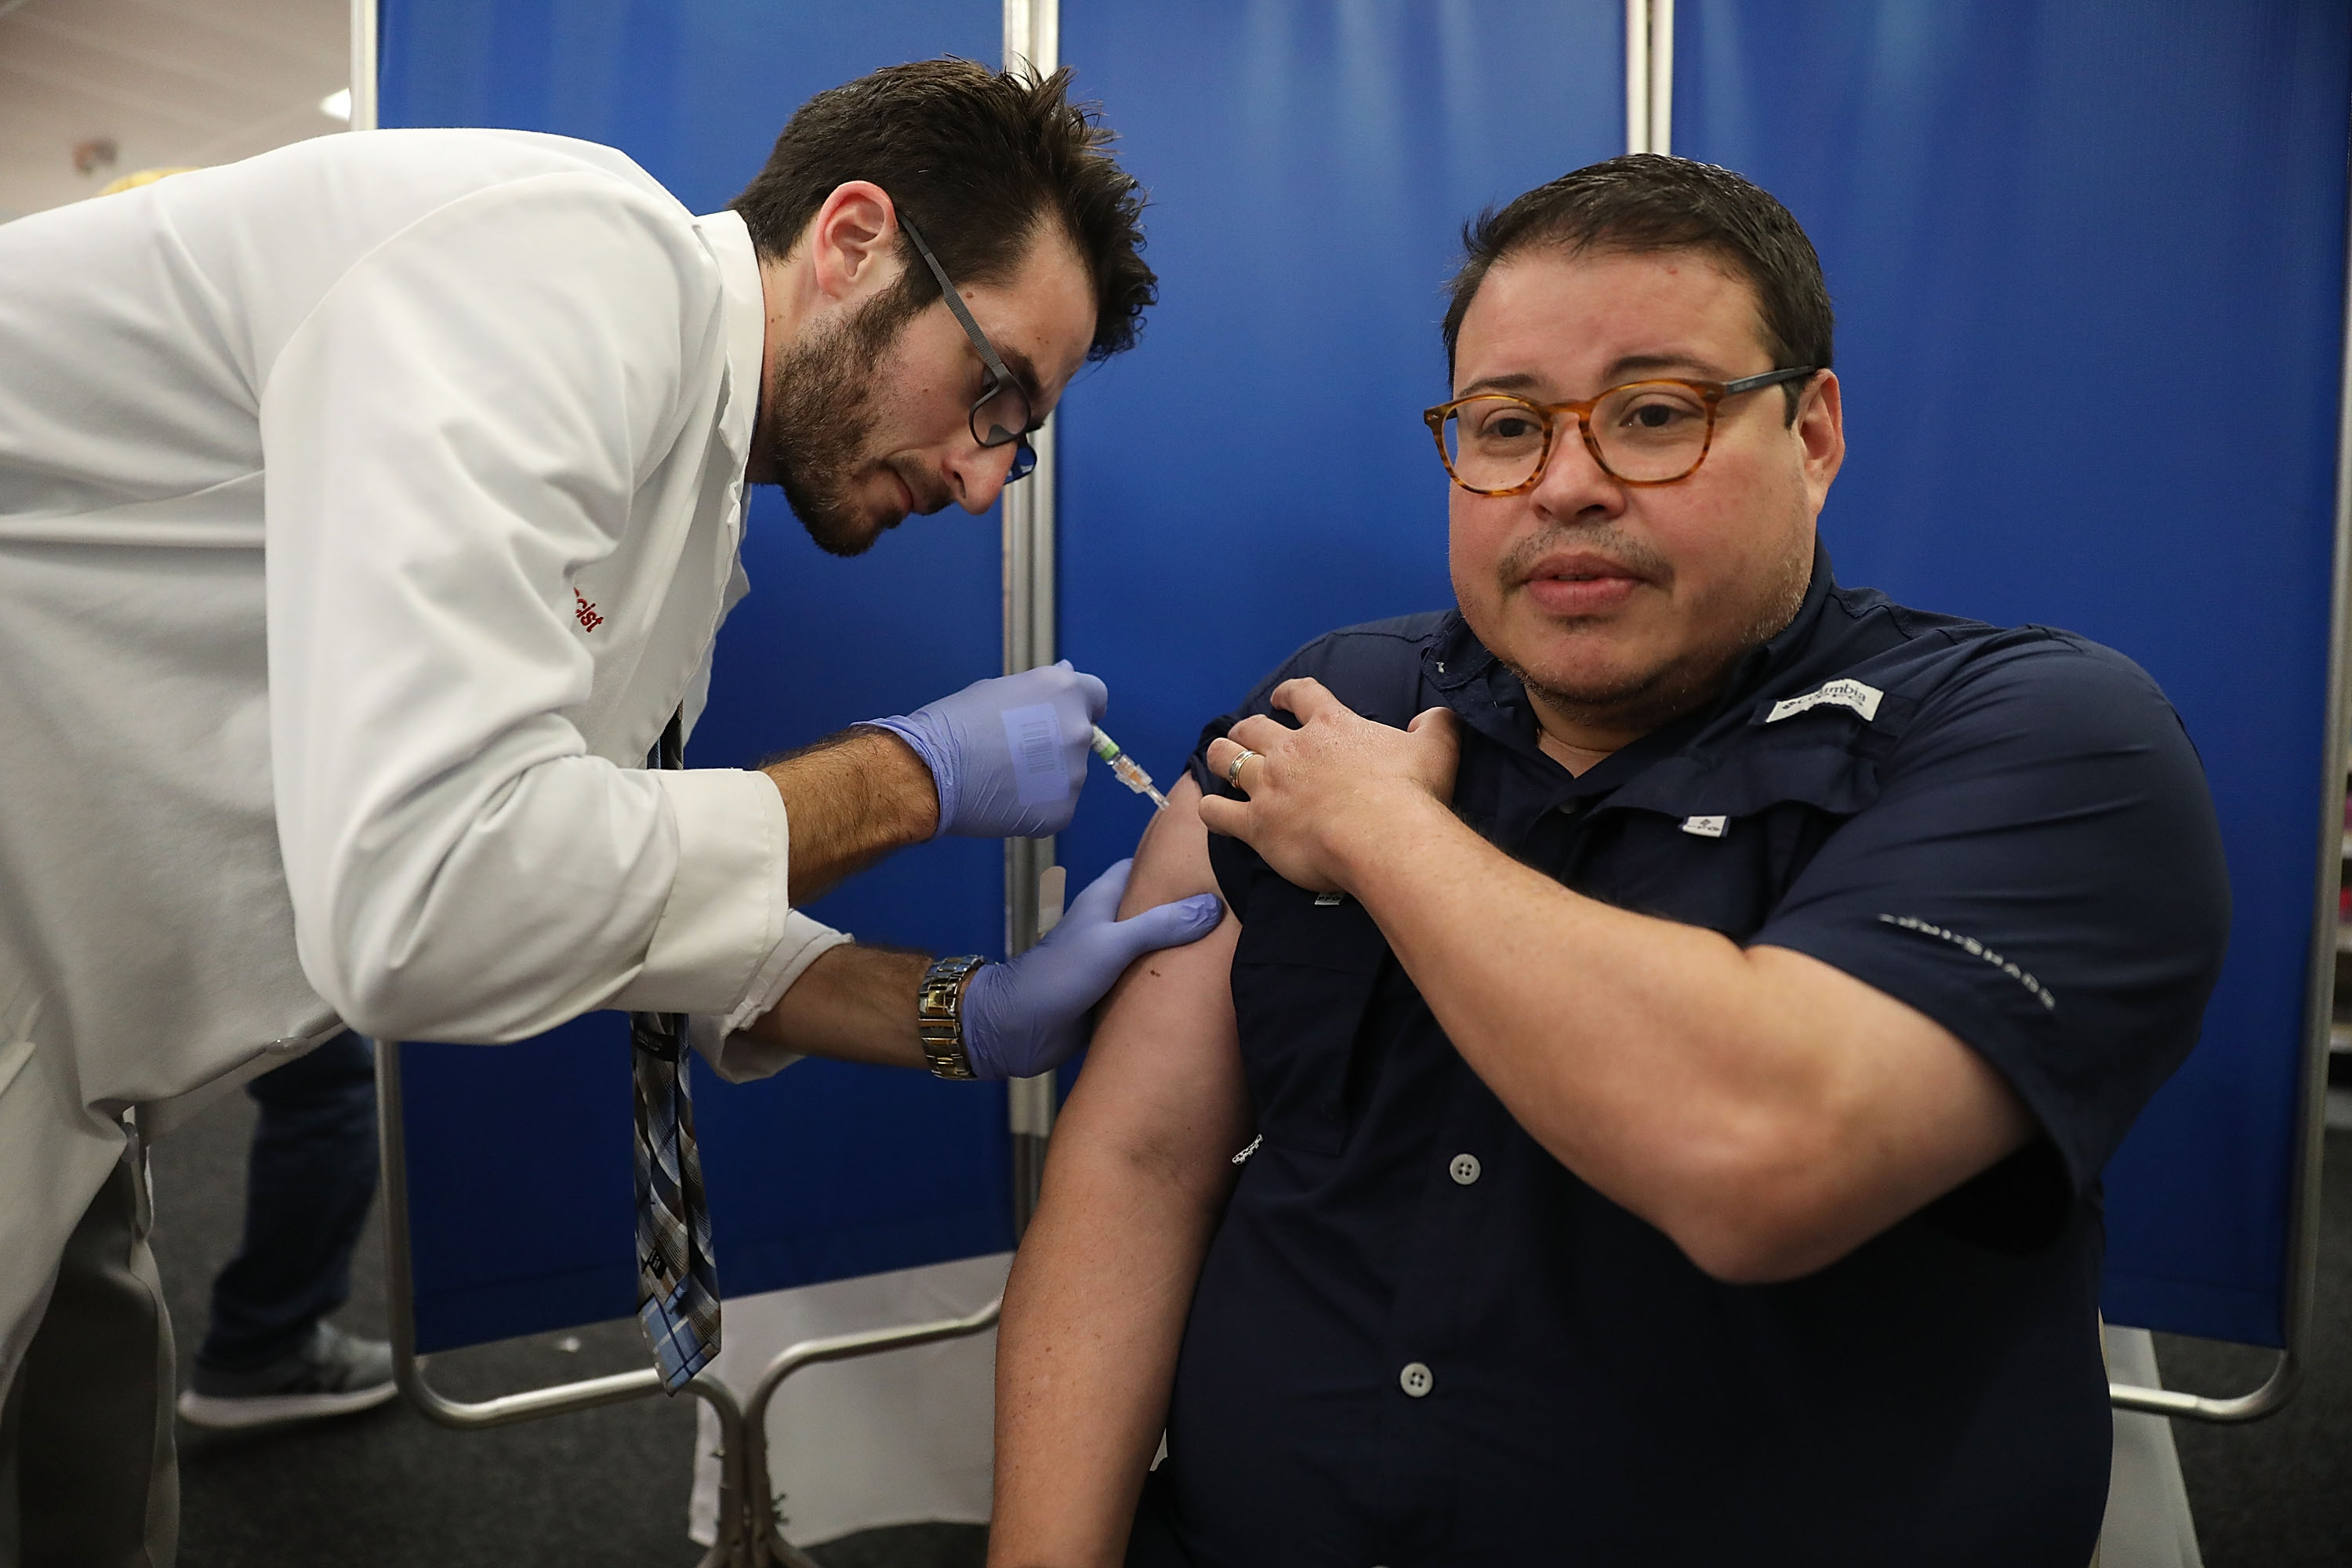 Mario Ancalmo receives an influenza vaccination from Raphael Lynne, Pharm. D., MBA, at the CVS/pharmacy on October 4, 2018 in Miami, Florida. Joe Raedle/Getty Images